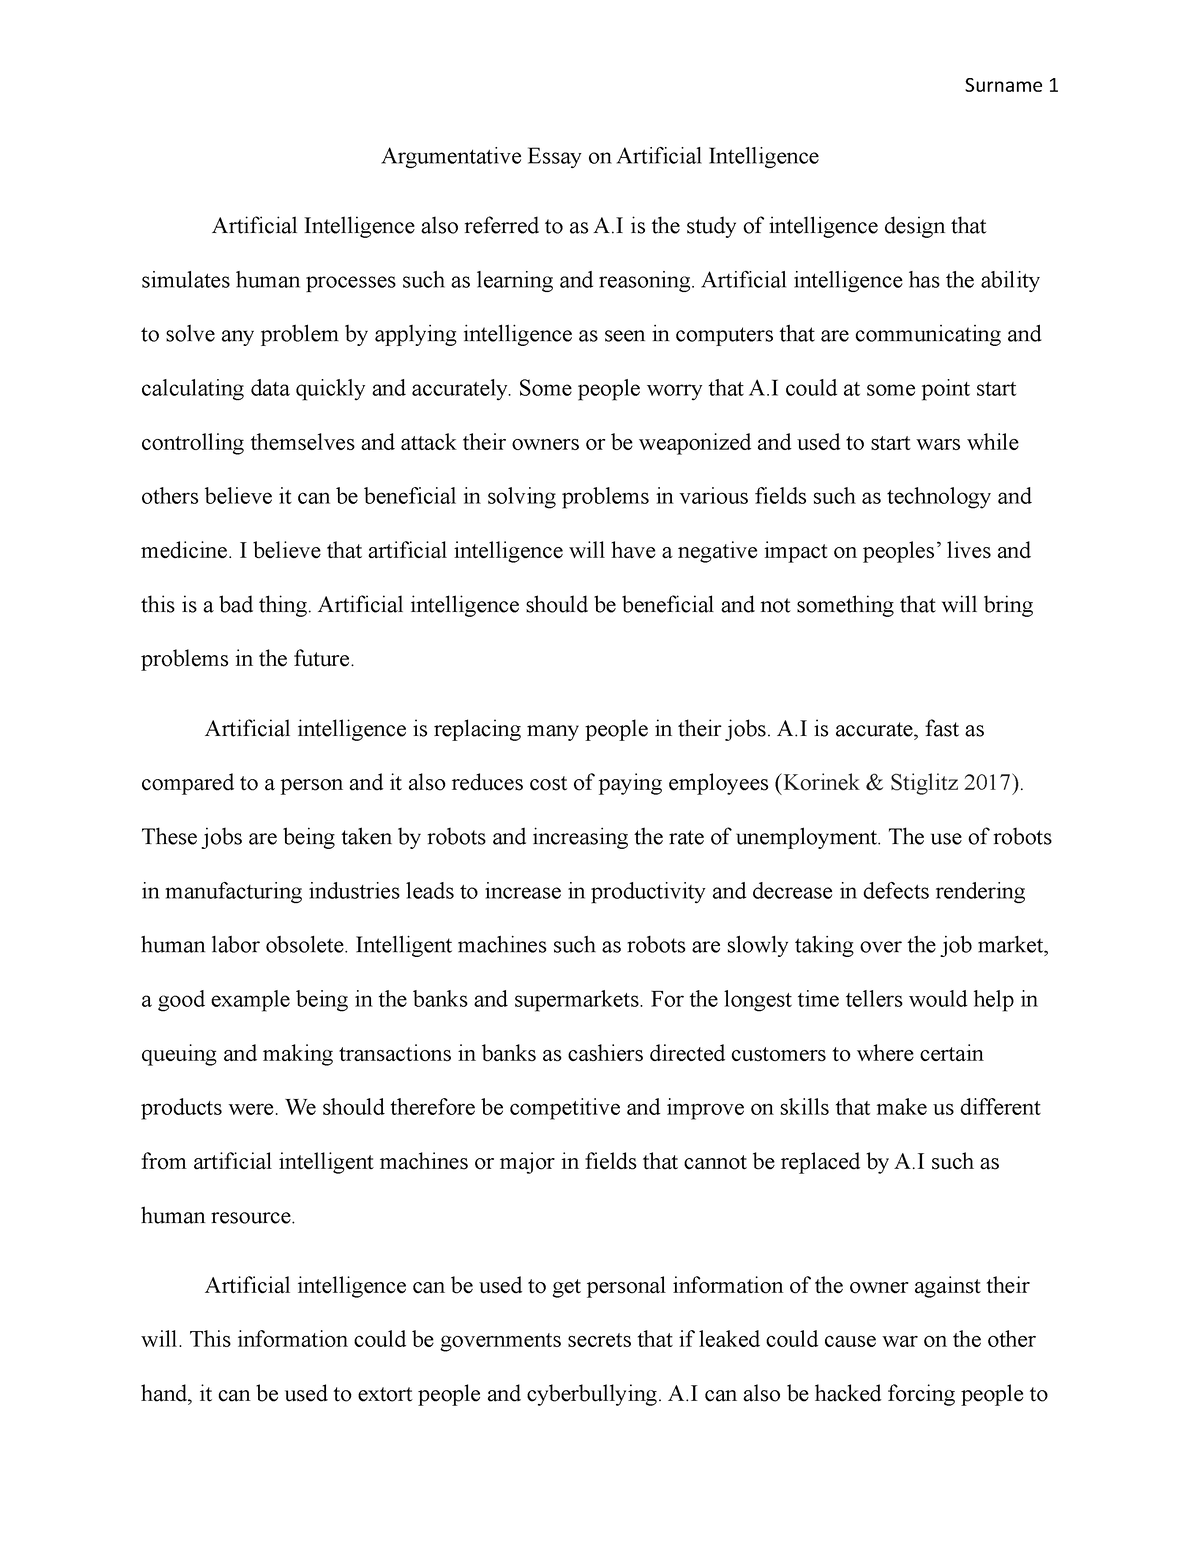 argumentative essay on will artificial intelligence take over human intelligence